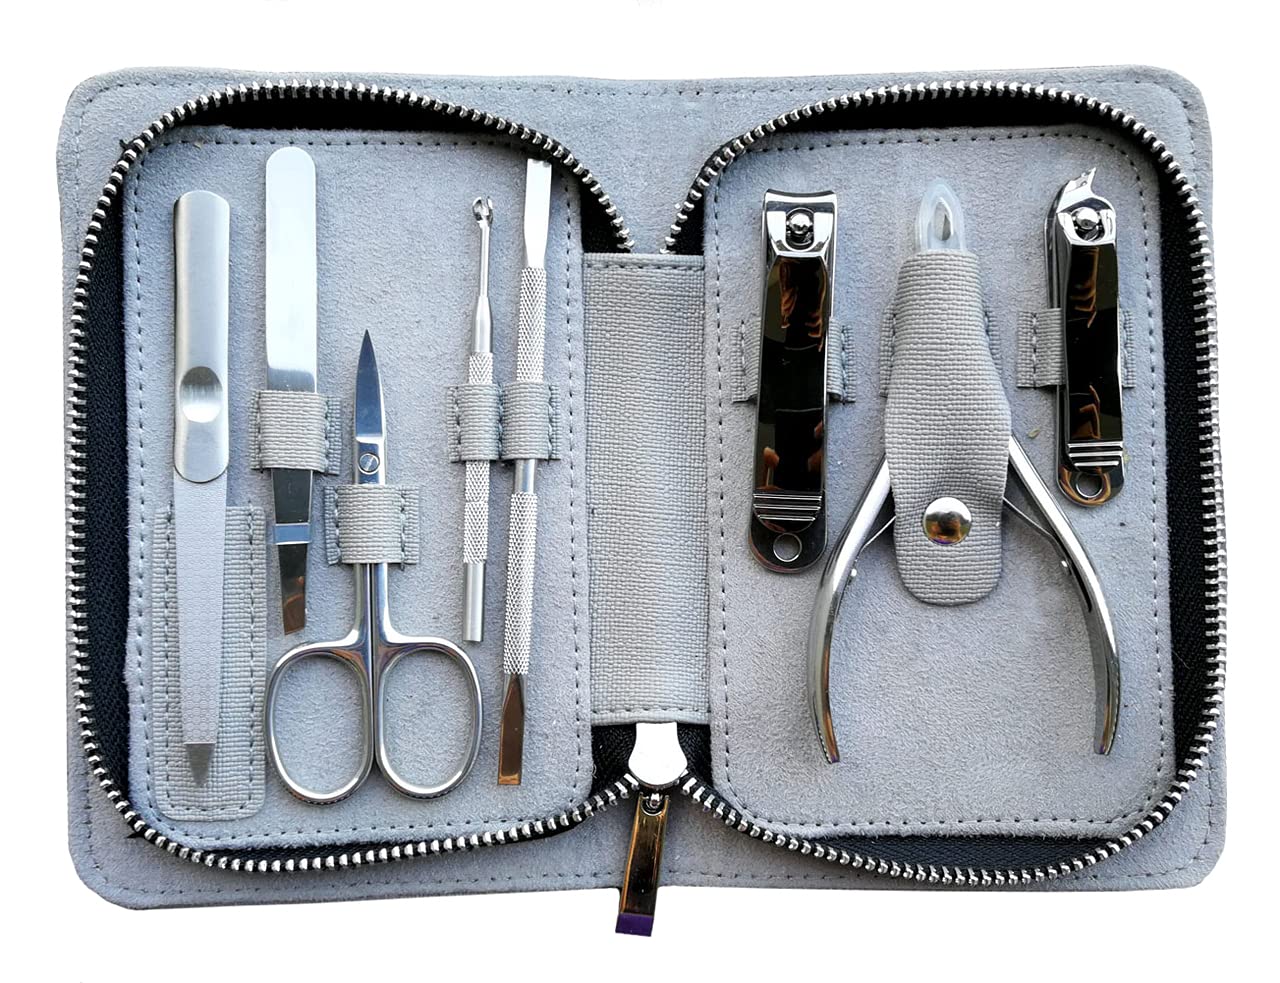 Rui Smiths Pro Stainless Steel 8-Piece Manicure Kit For Home And Salon With Professional Precision Cuticle Nipper And Metal Pusher Style No. 105